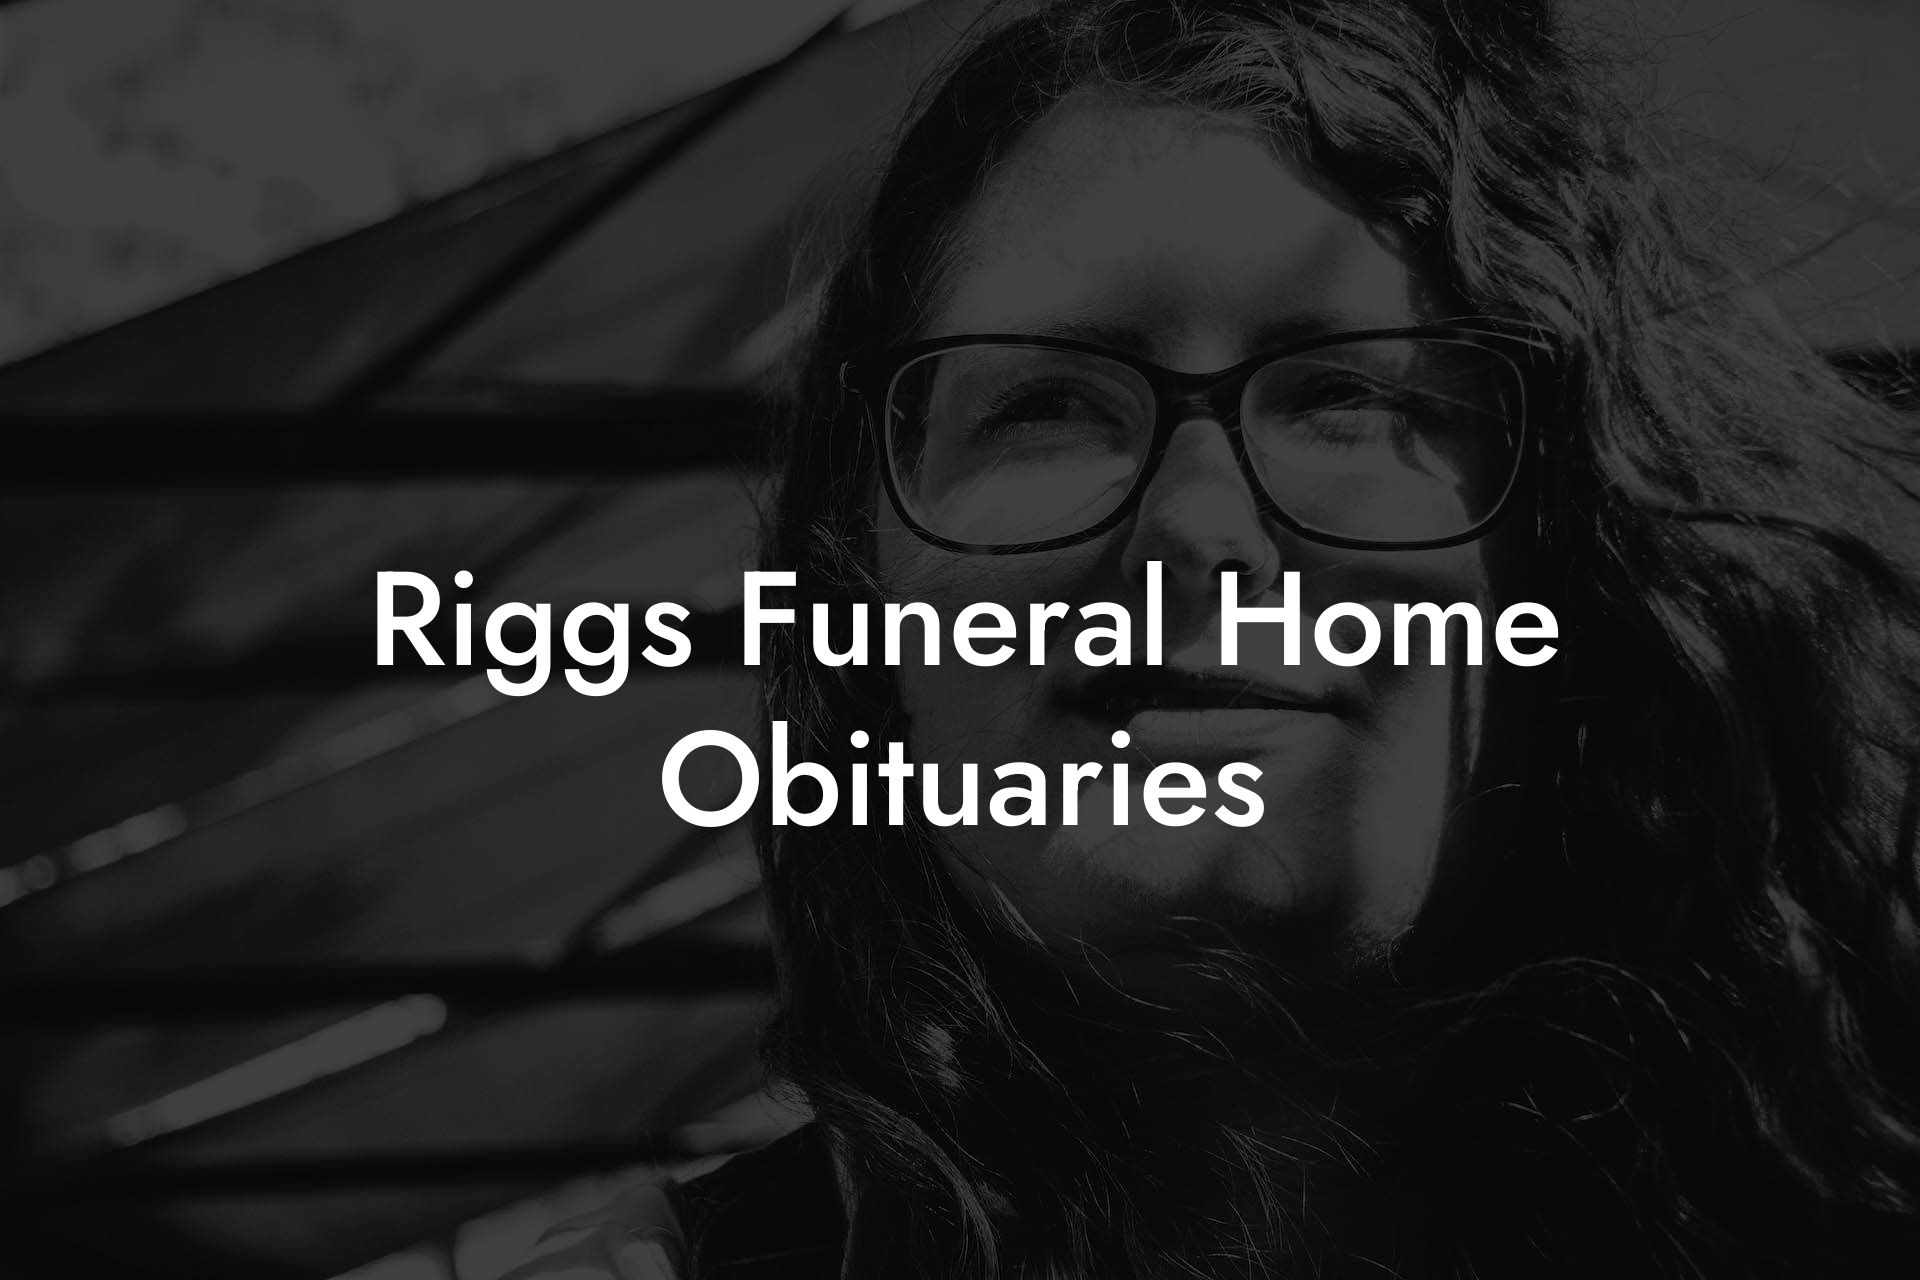 Riggs Funeral Home Obituaries